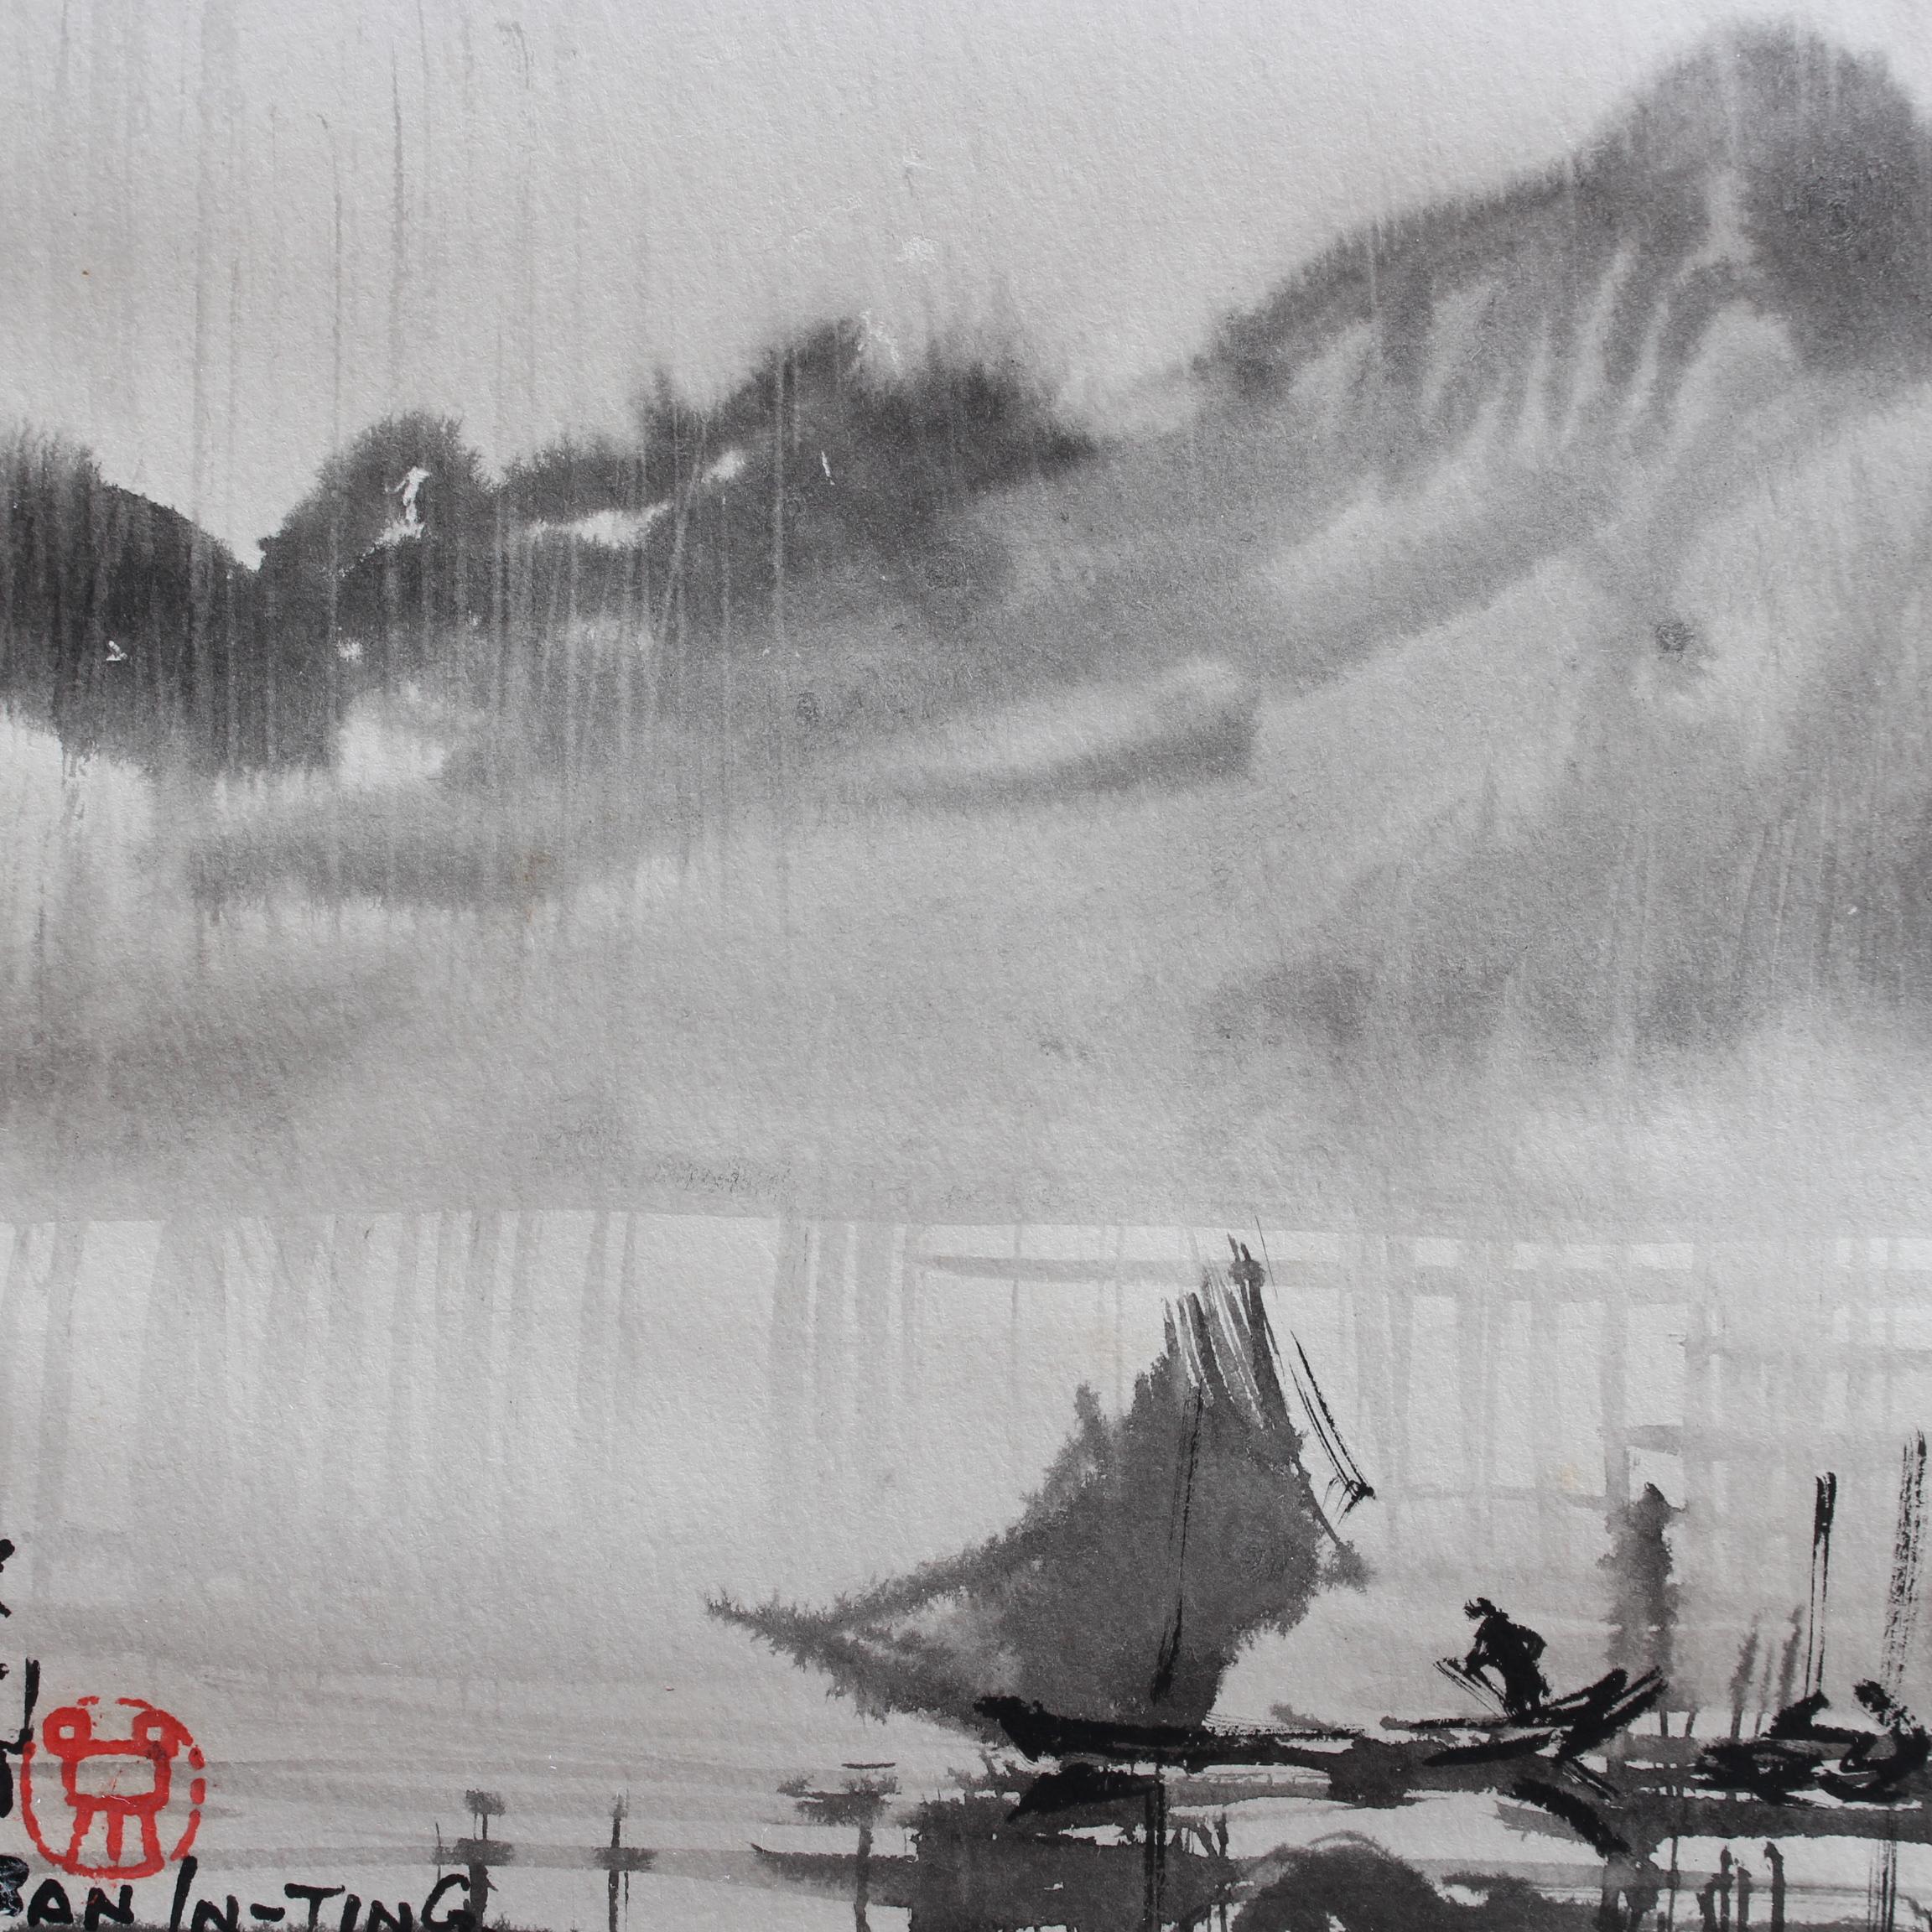 'Raining in Formosa on the Tamsui River' by Ran In-Ting (Lan Yinding, 藍蔭鼎) For Sale 14